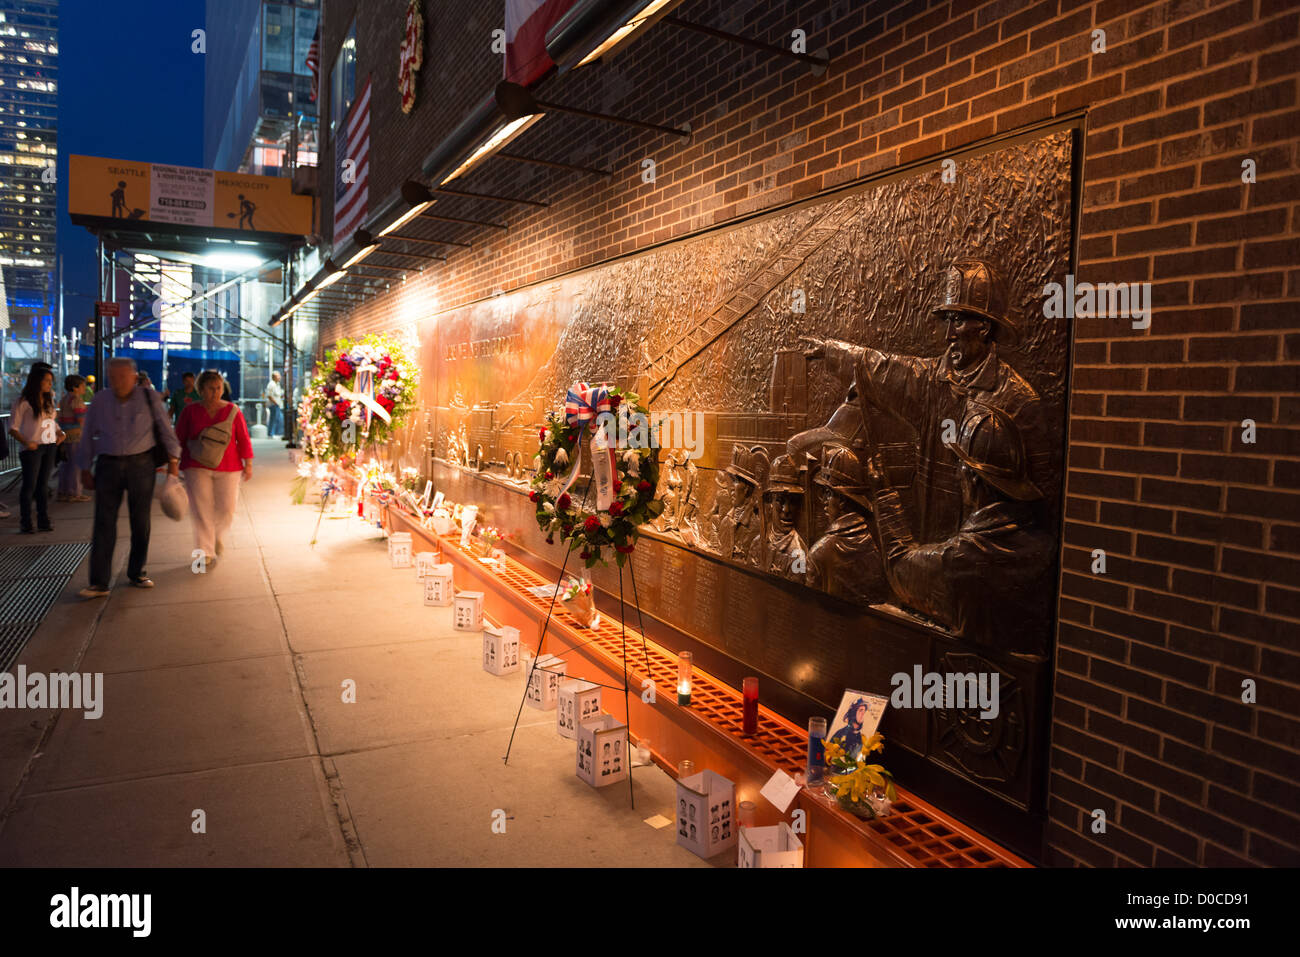 Memorial Wall of the 343 firefighters of FDNY Stock Photo